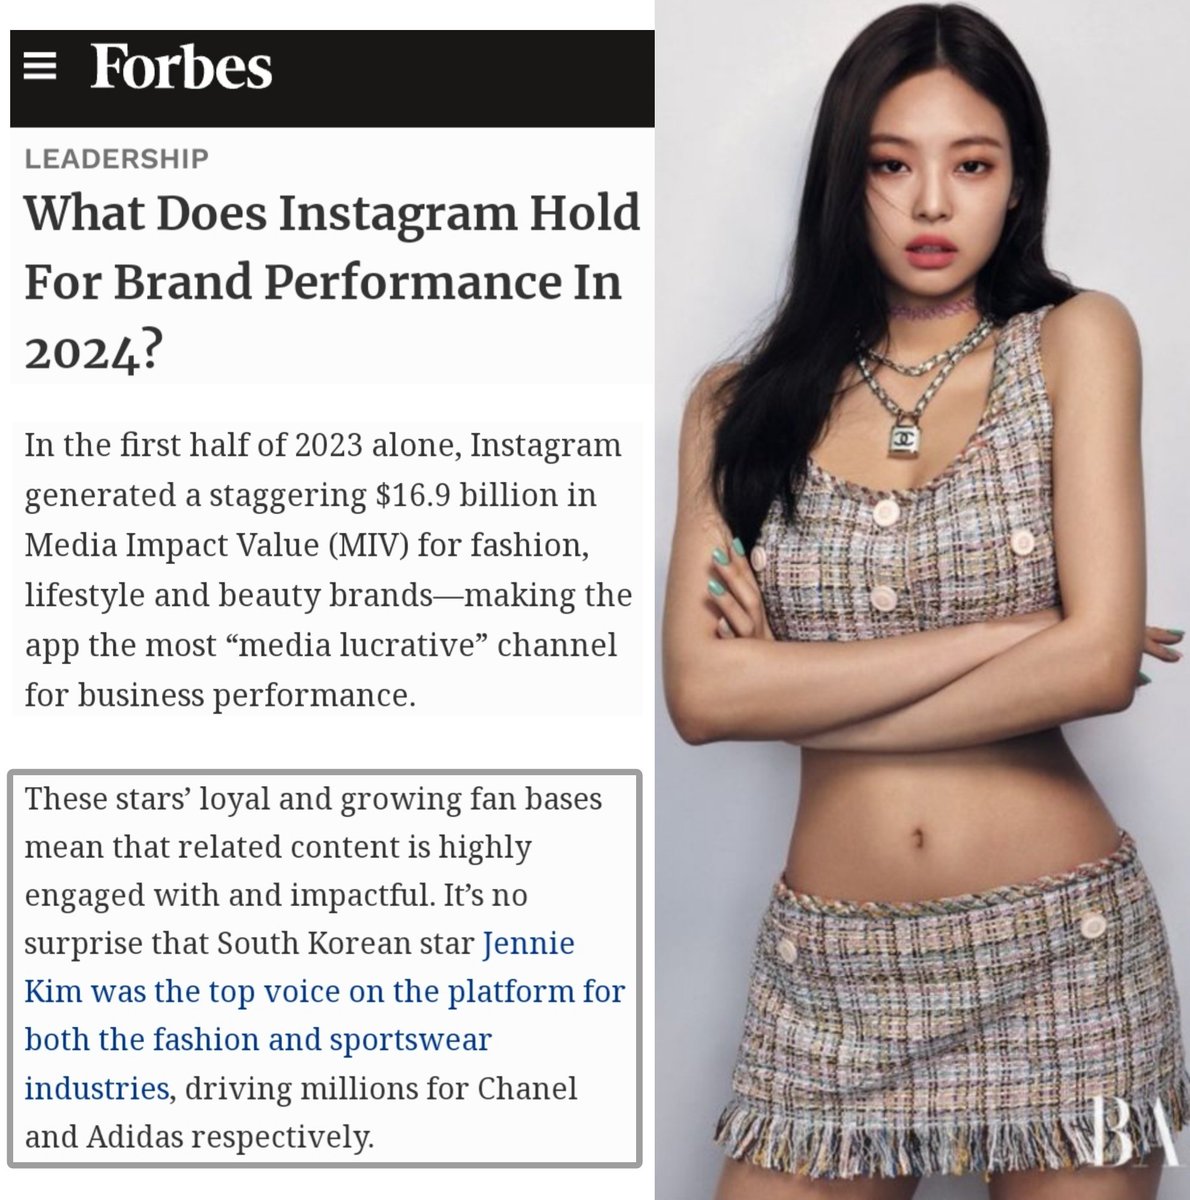 090224 #JENNIE is the ONLY Celebrity mentioned on FORBES 🇺🇸 about Instagram: ..It’s no surprise that South Korean star Jennie Kim was the TOP voice on the platform for both the fashion and sportswear industries, driving MILLIONS for Chanel and Adidas respectively.